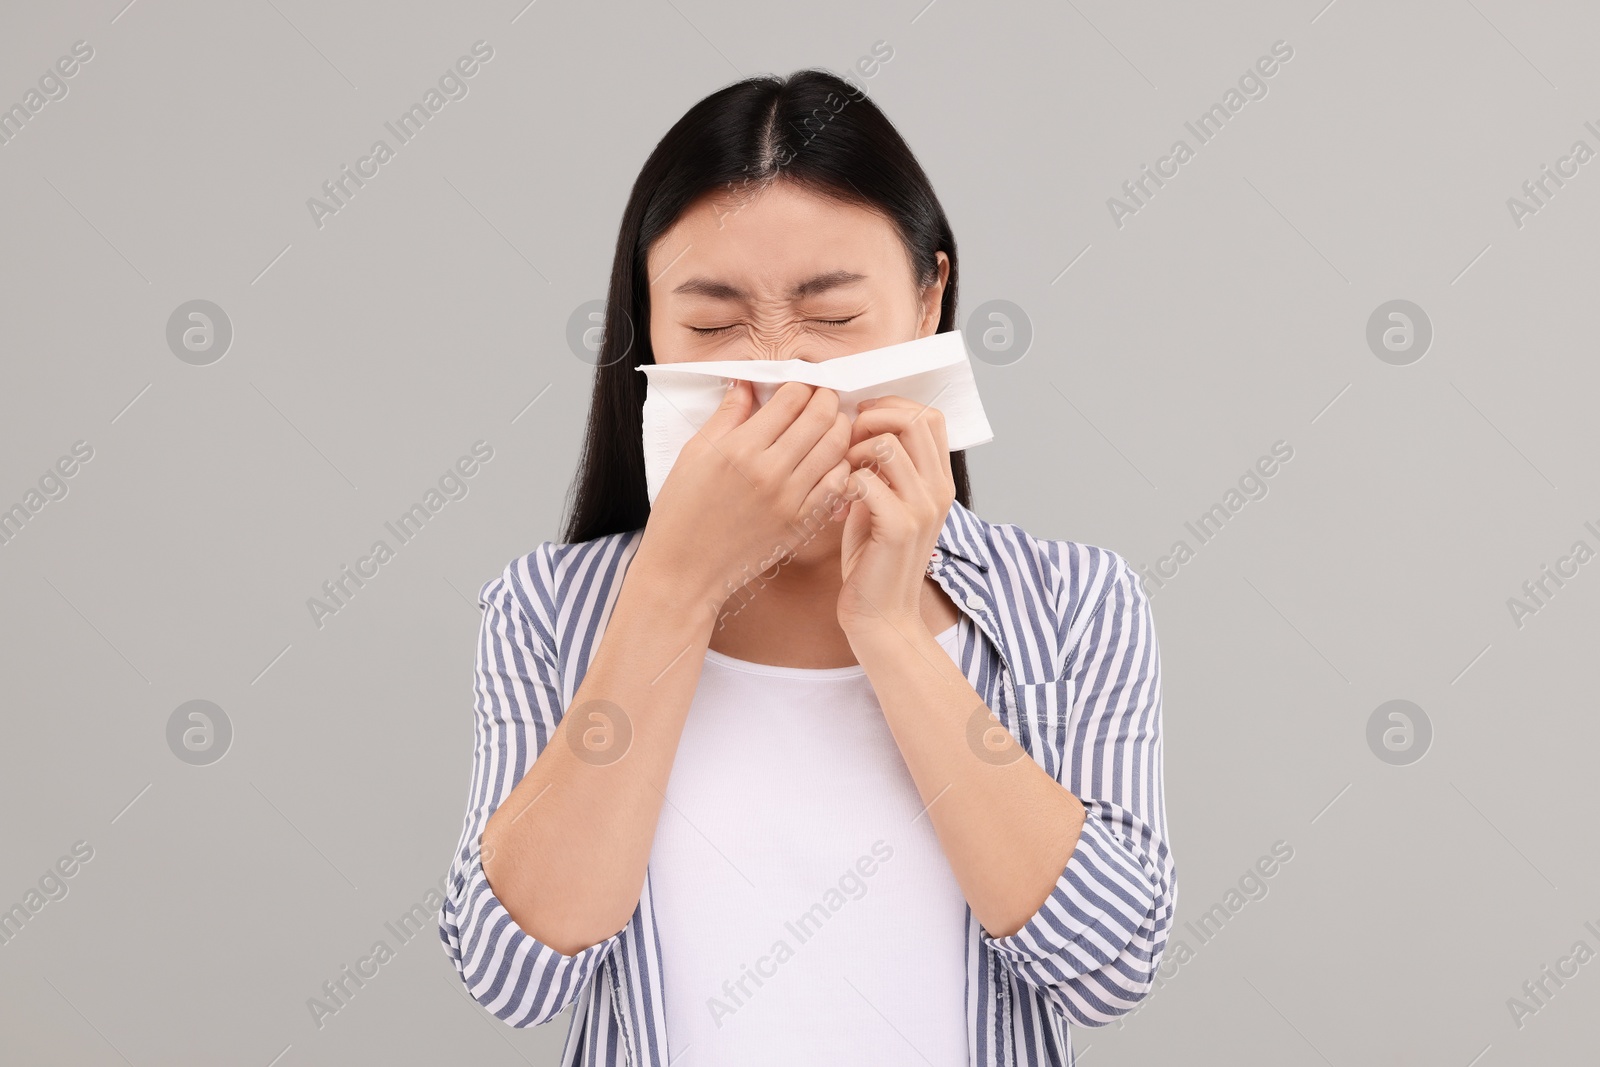 Photo of Suffering from allergy. Young woman with tissue sneezing on grey background